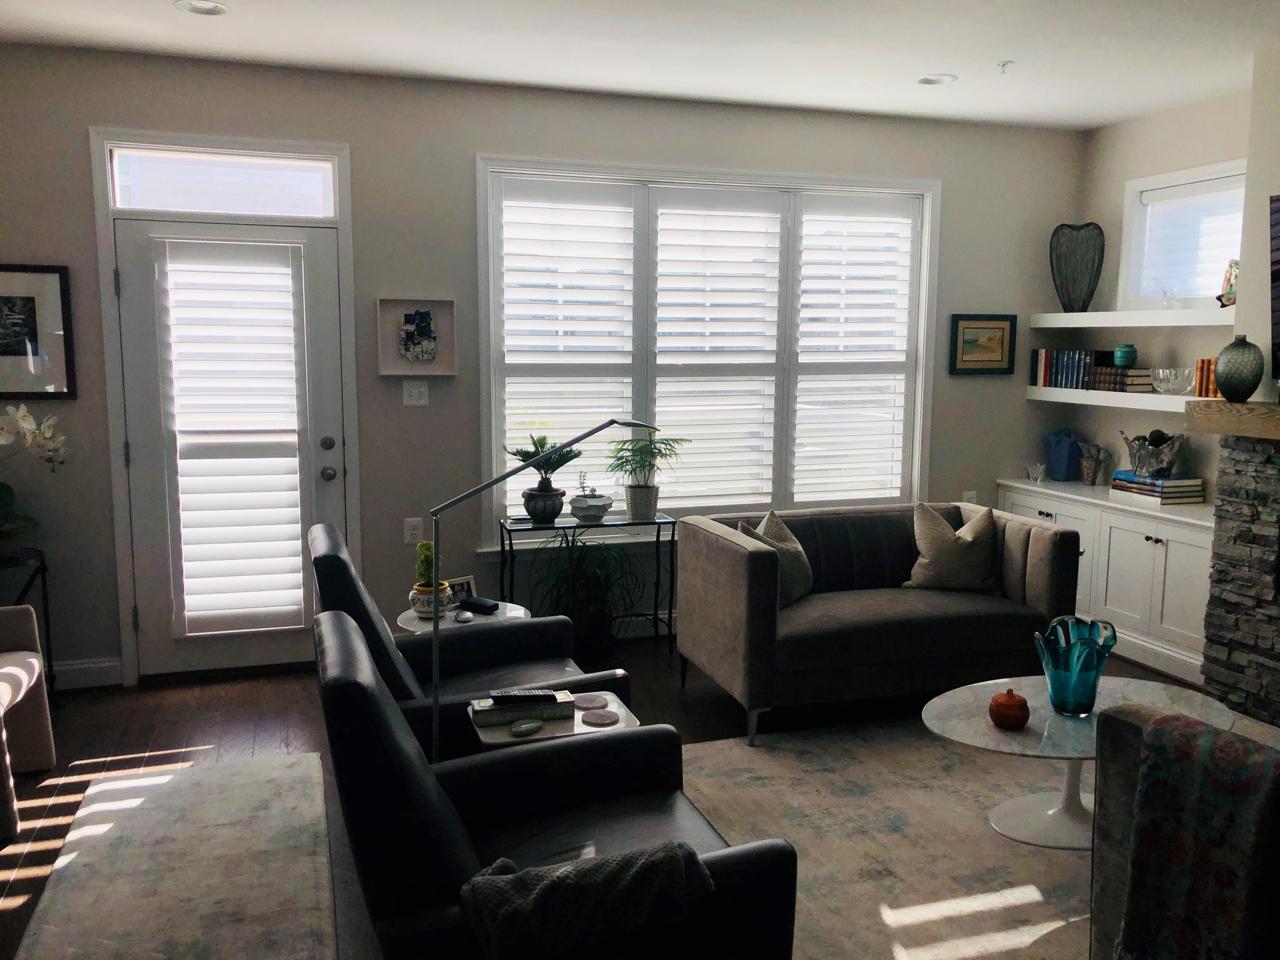 Louverwood shutters on French Door in living room